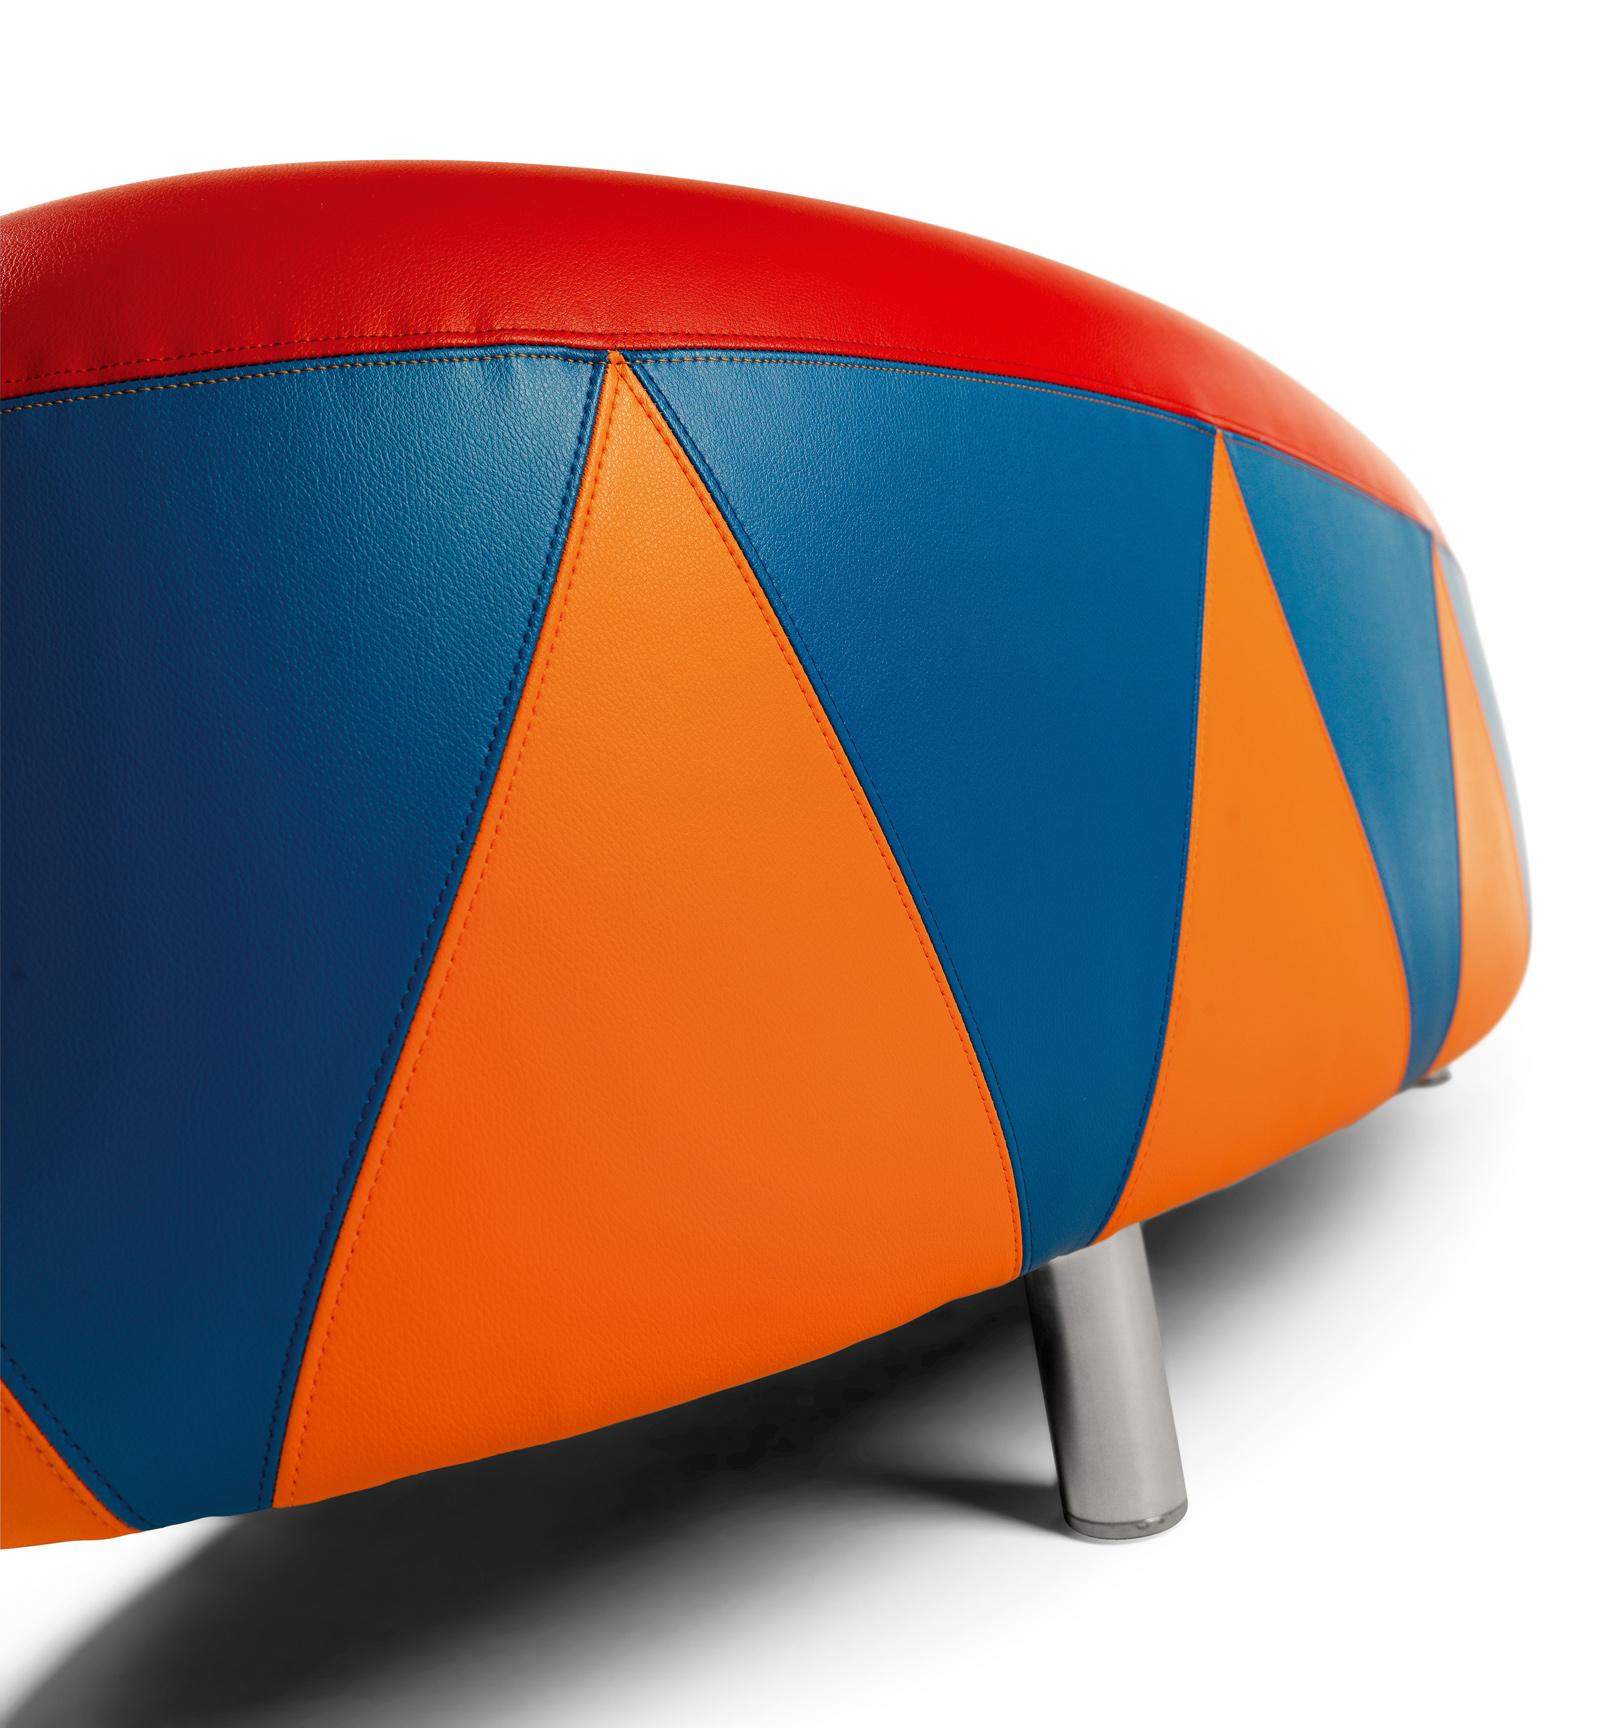 Post-Modern Pouf Eco-Leather Polychrome Design by Anna Gili Milan pouf made in Italy For Sale